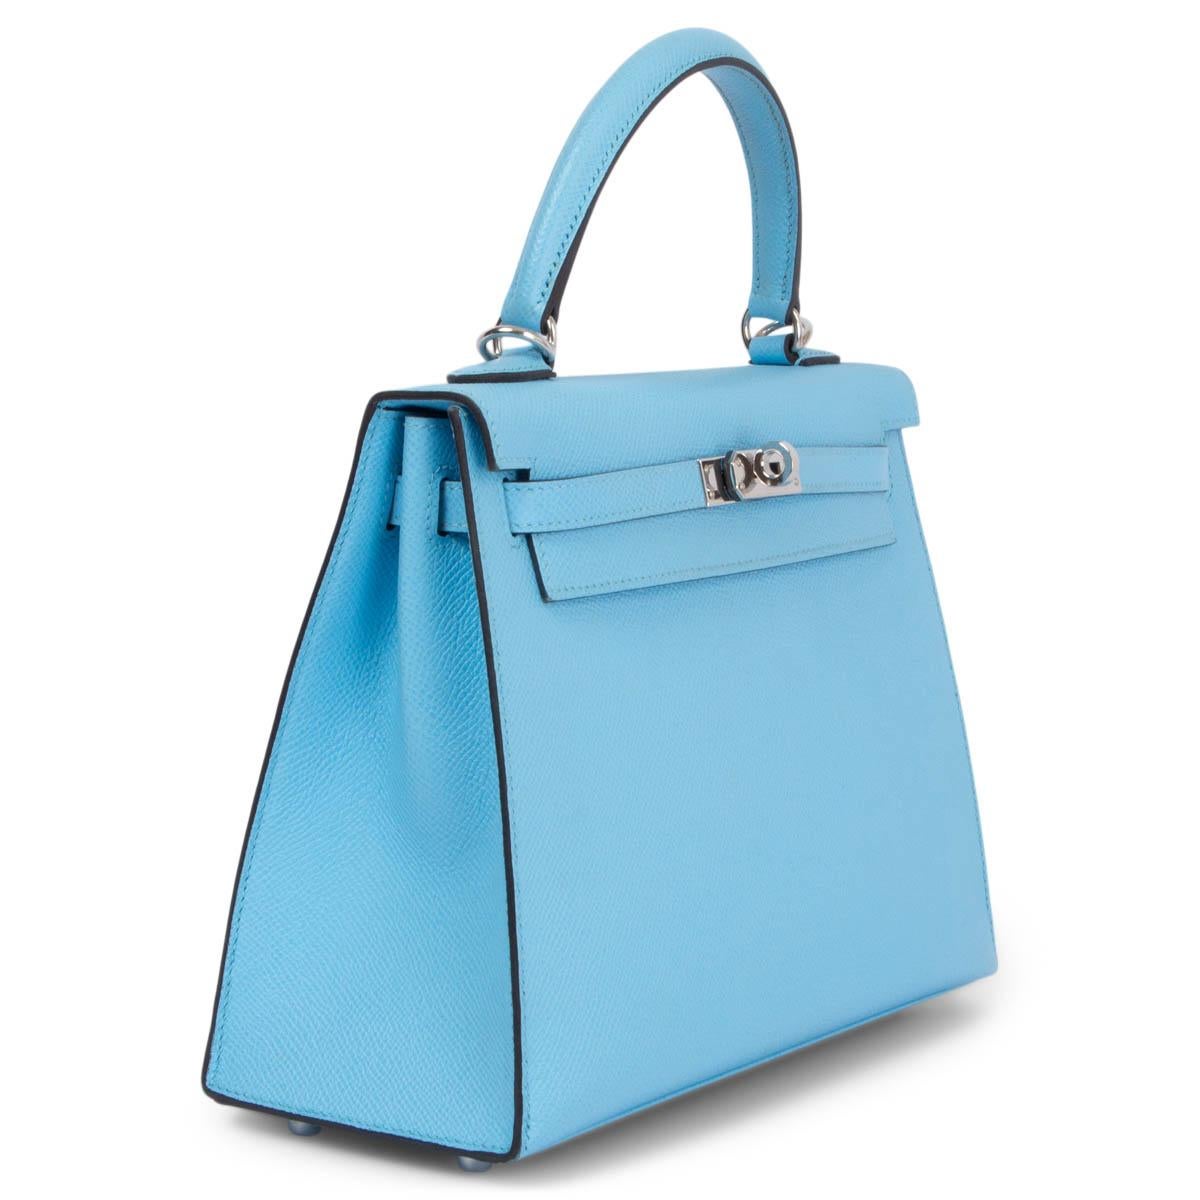 100% authentic Hermès Kelly 25 Sellier bag in Celeste (light blue) Veau Epsom leather with palladium-plated hardware. Lined in Chevre (goat skin) with an open pocket against the front and a zipper pocket against the back. Has been carried with some